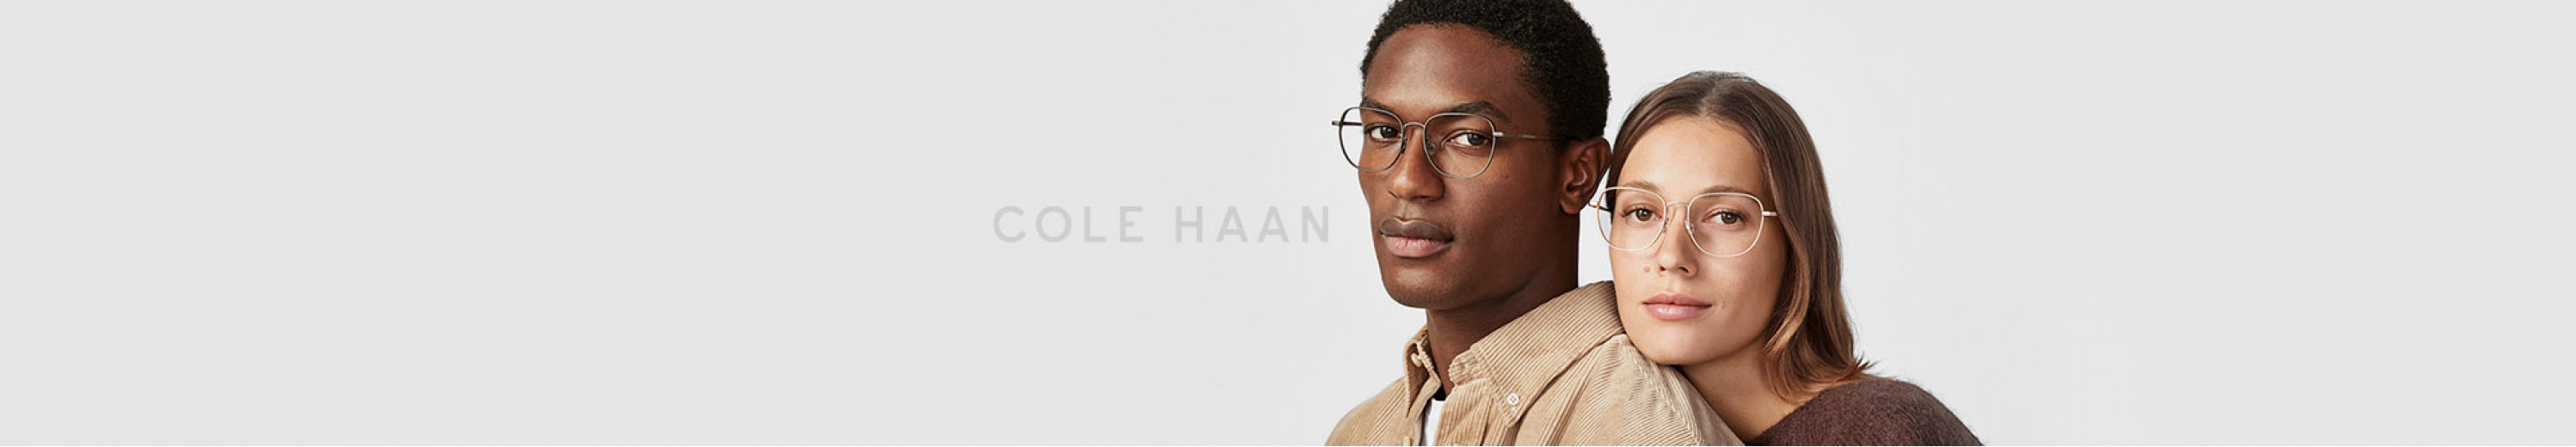 Cole Haan Glasses and Eyewear